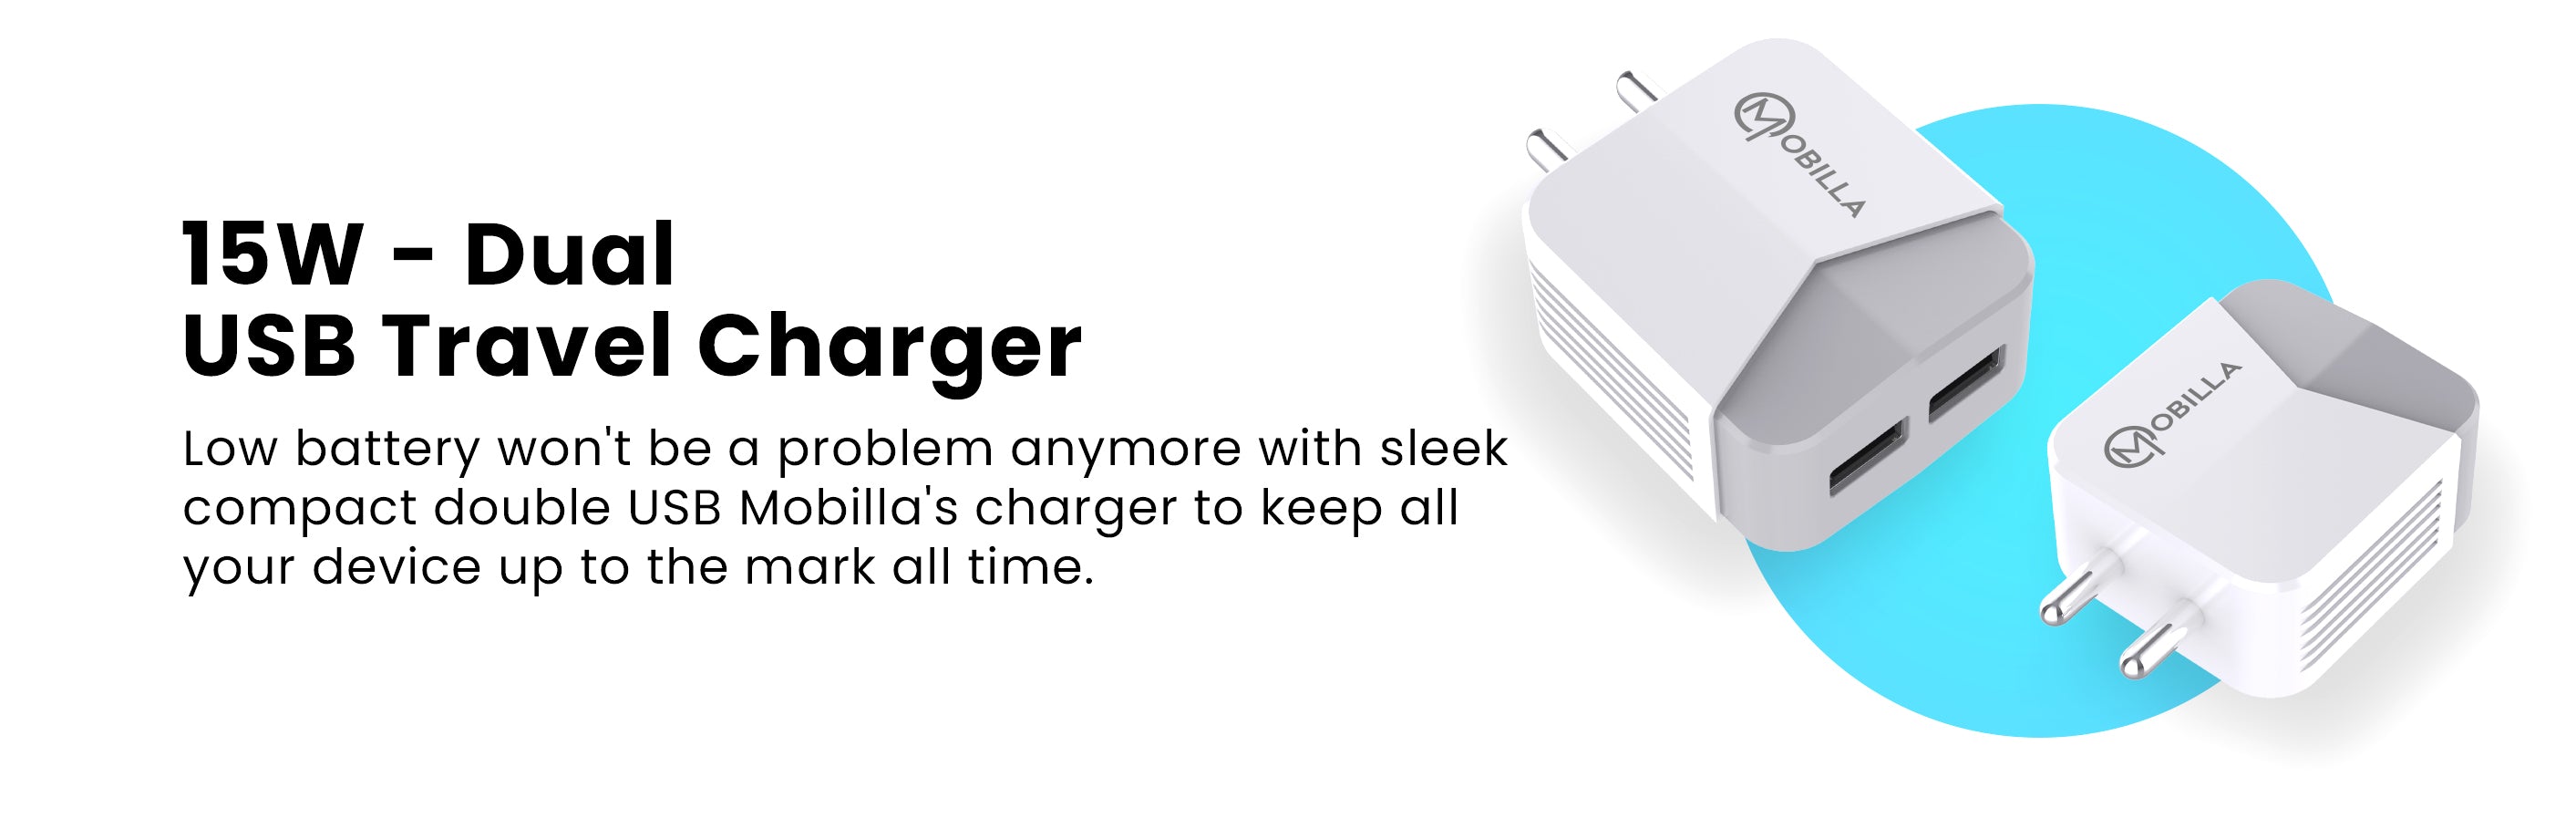 Universal Adapter Charger